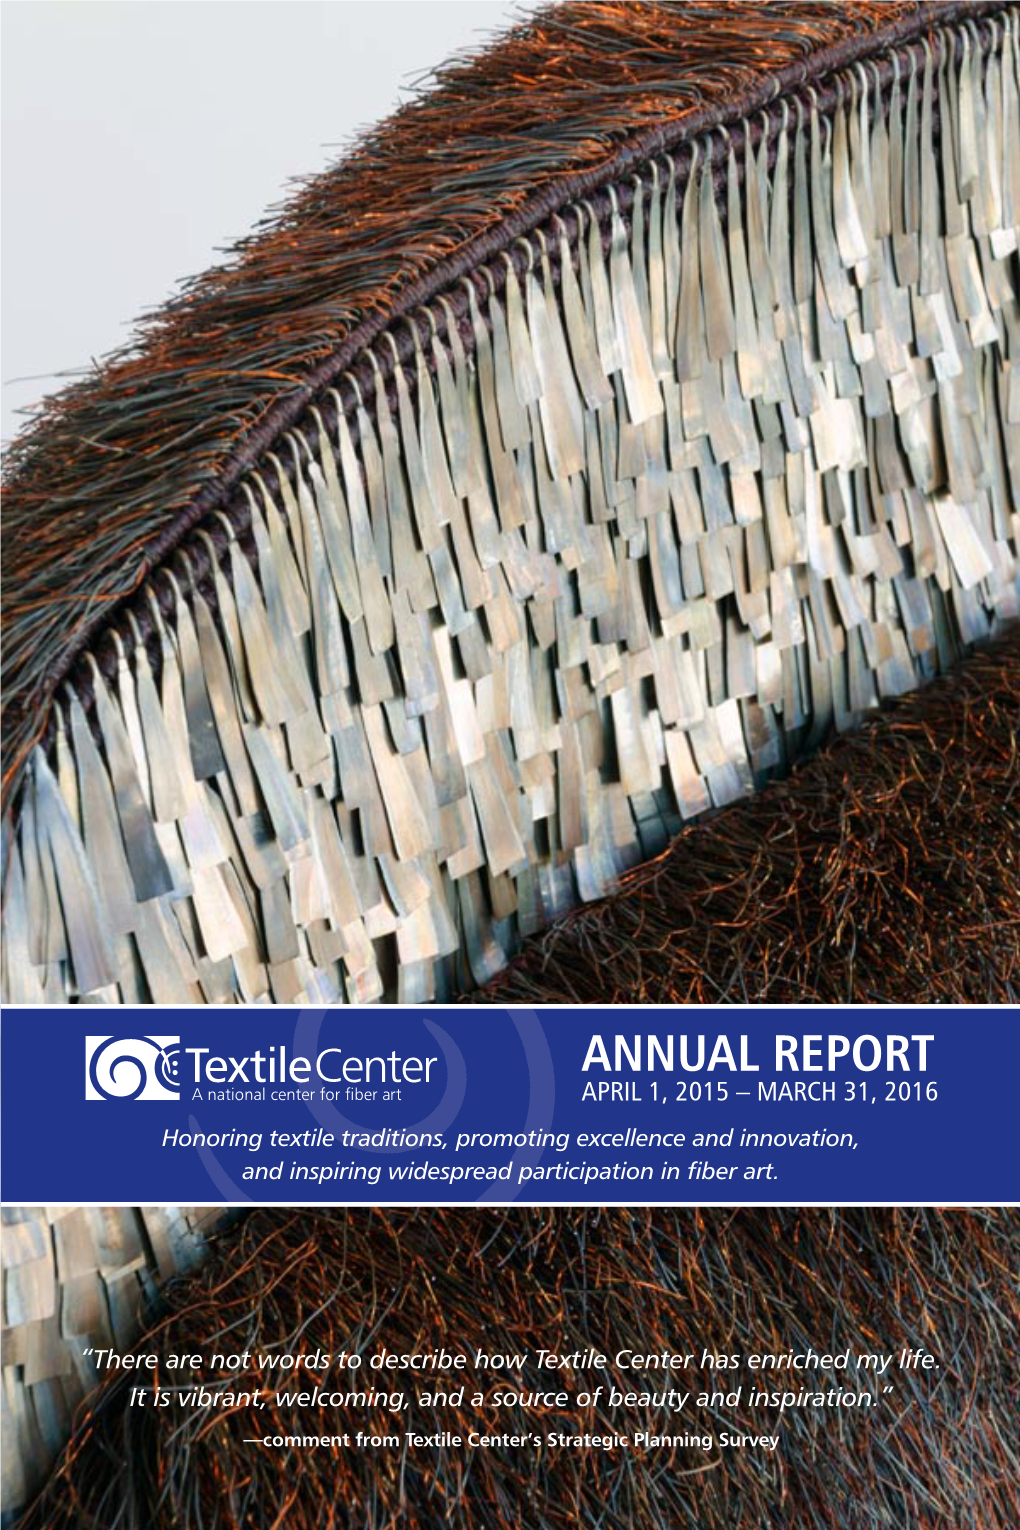 Annual Report April 1, 2015 – March 31, 2016 Honoring Textile Traditions, Promoting Excellence and Innovation, and Inspiring Widespread Participation in Fiber Art